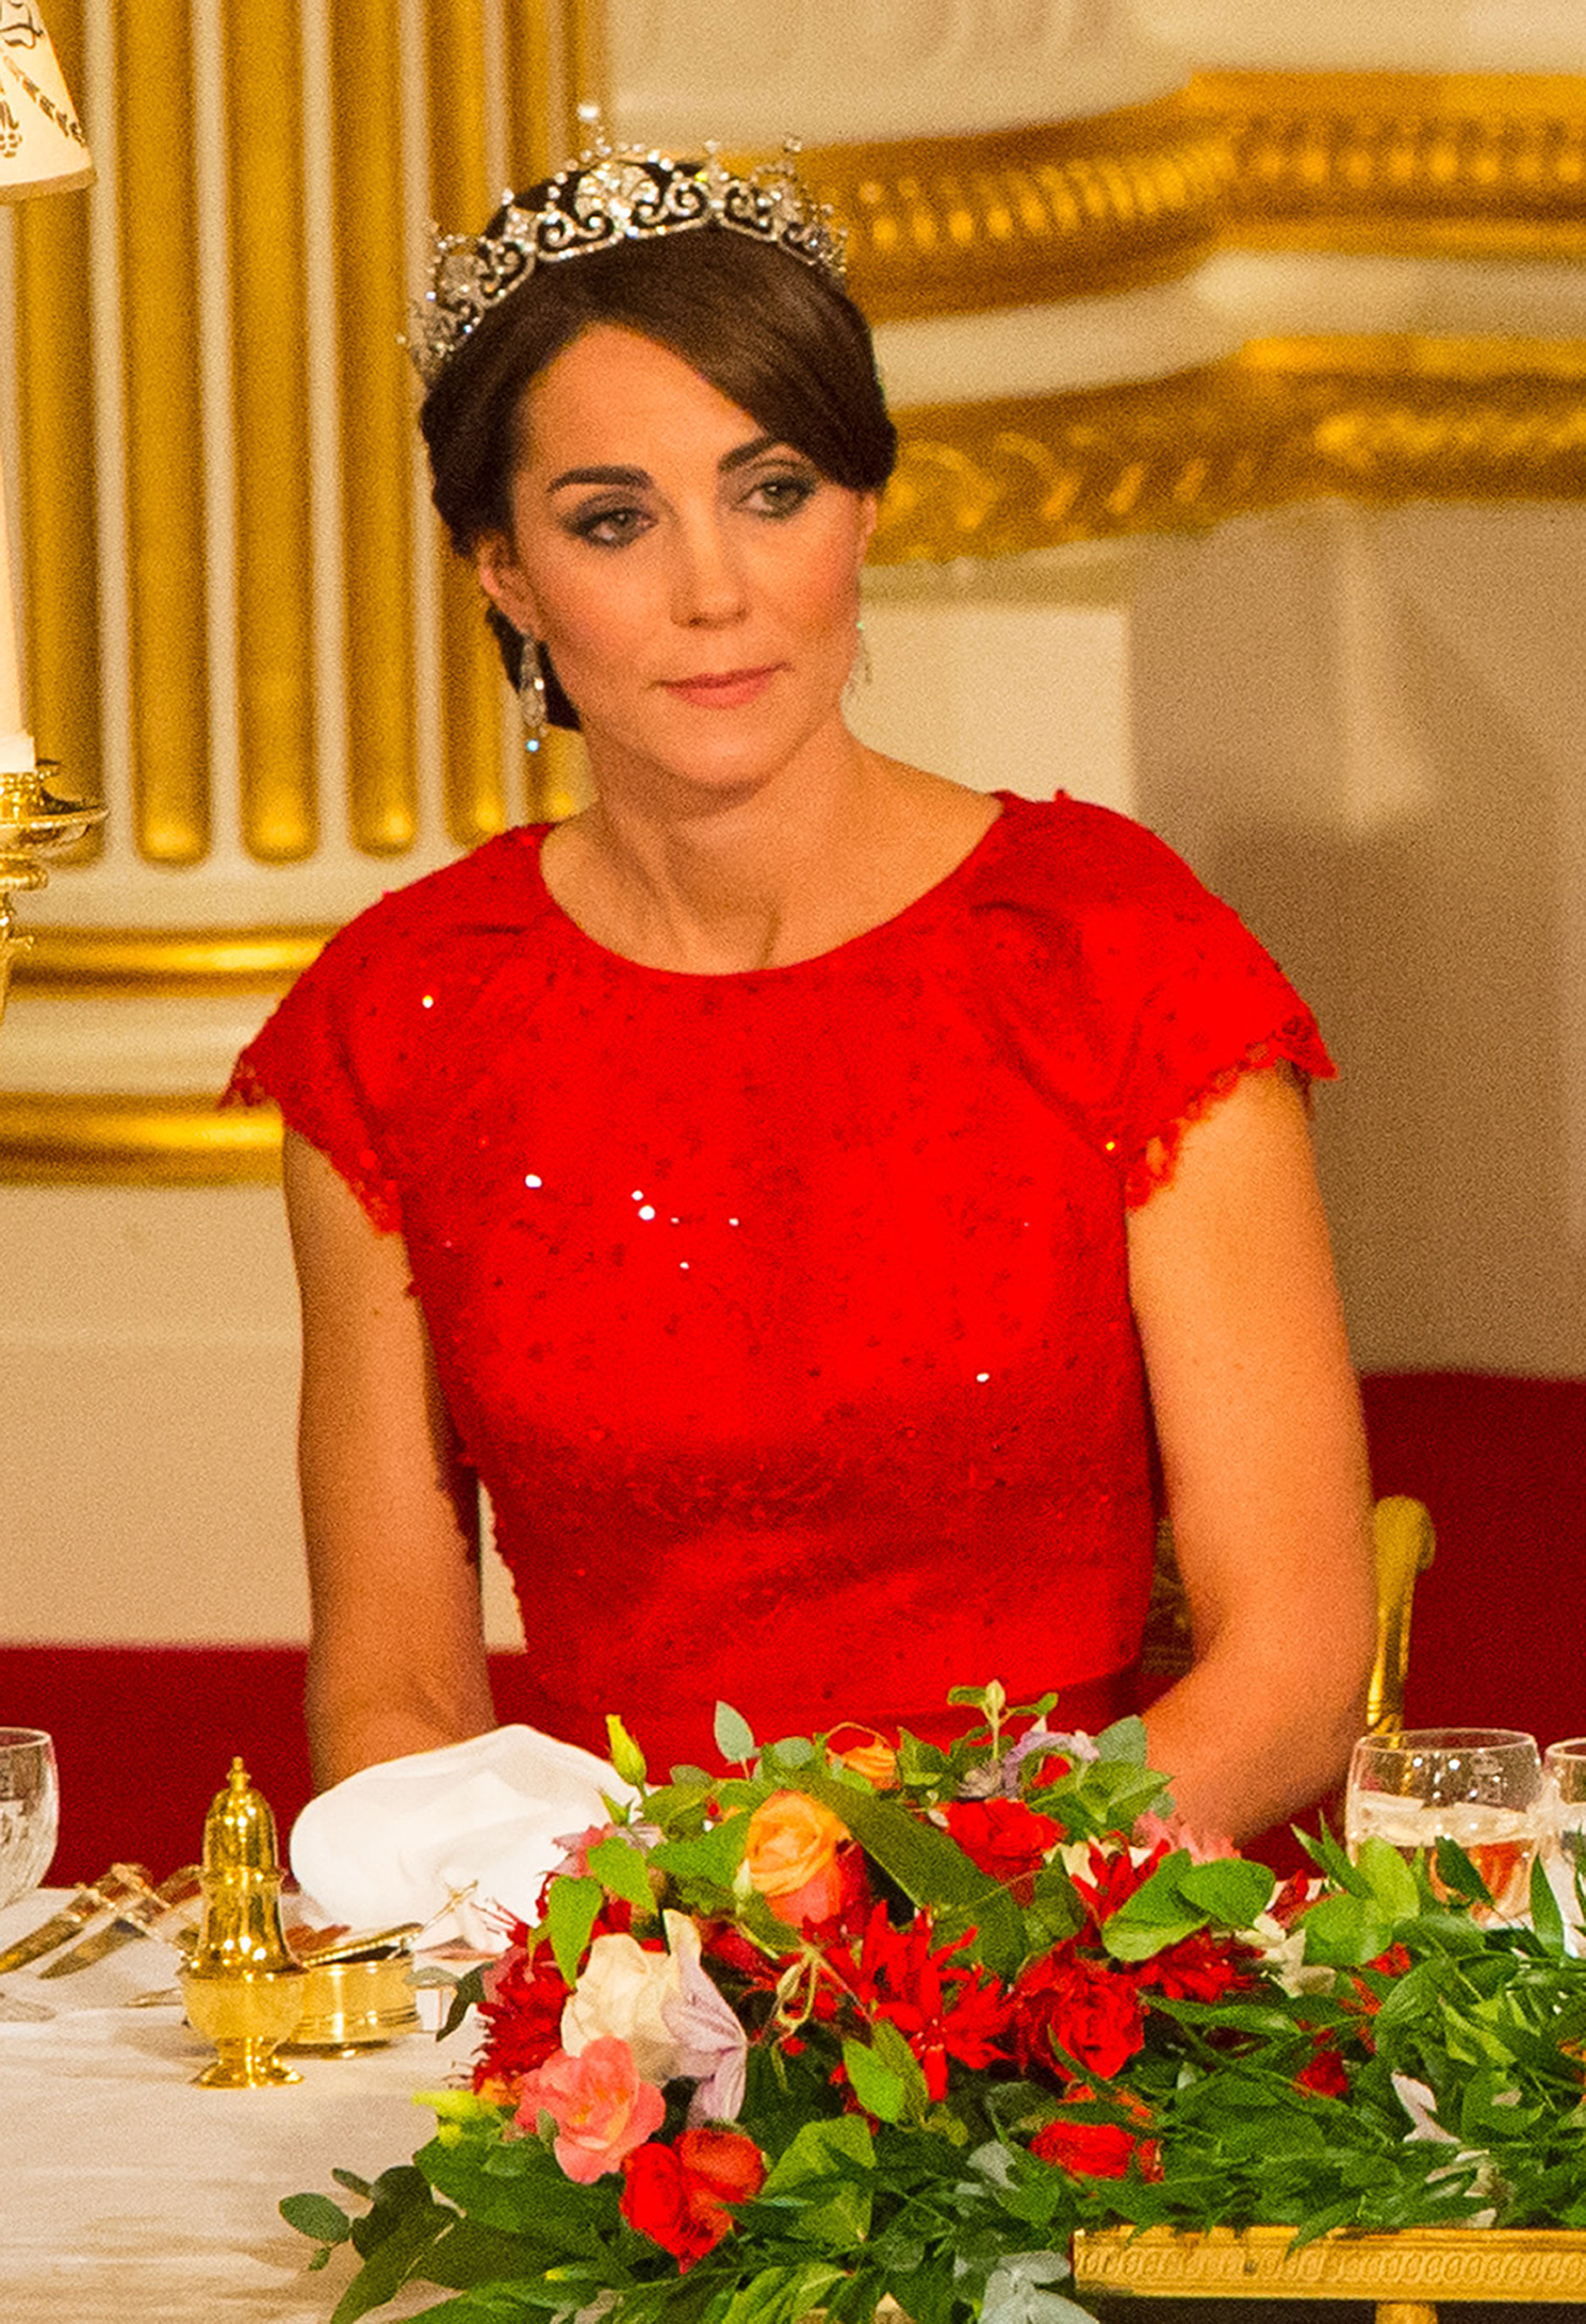 The Duchess of Cambridge as Queen Elizabeth II speaks at a state banquet at Buckingham Palace in London on Oct. 20, 2015. (Dominic Lipinski—AP)